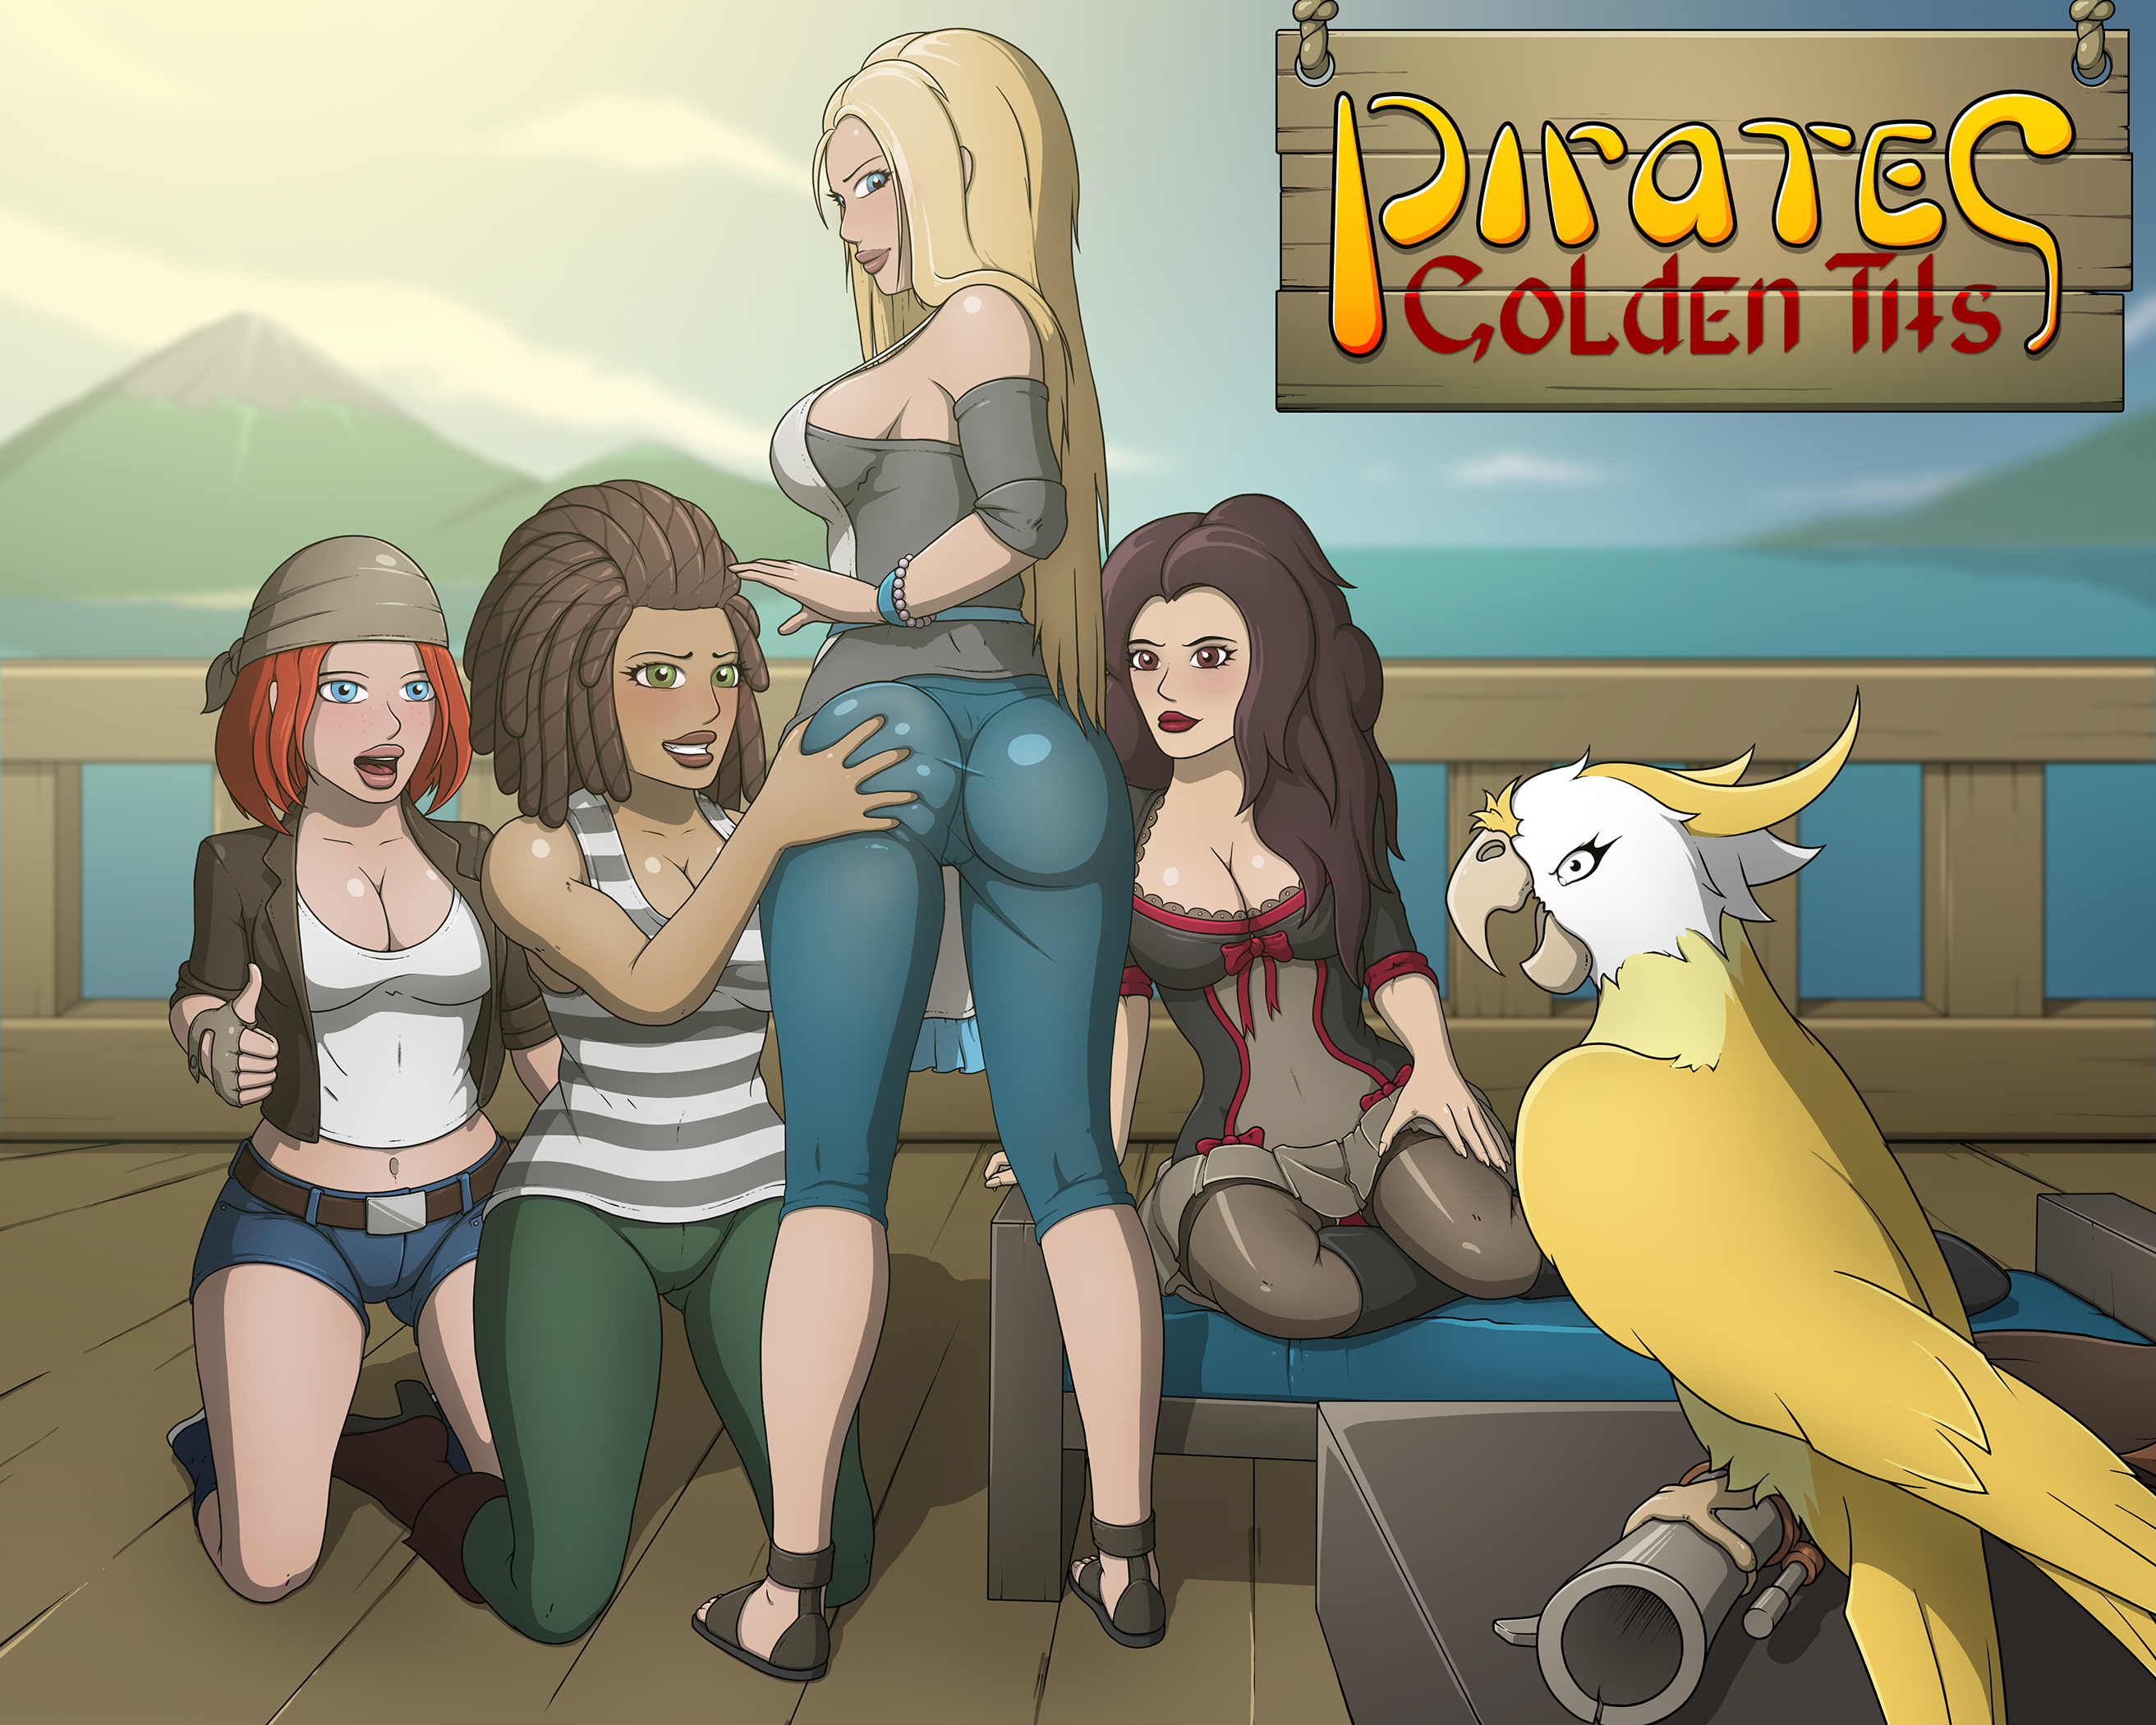 Pirate Tits - Pirates : Golden Tits (0.22) [NSFW] 18+ by Hot Bunny